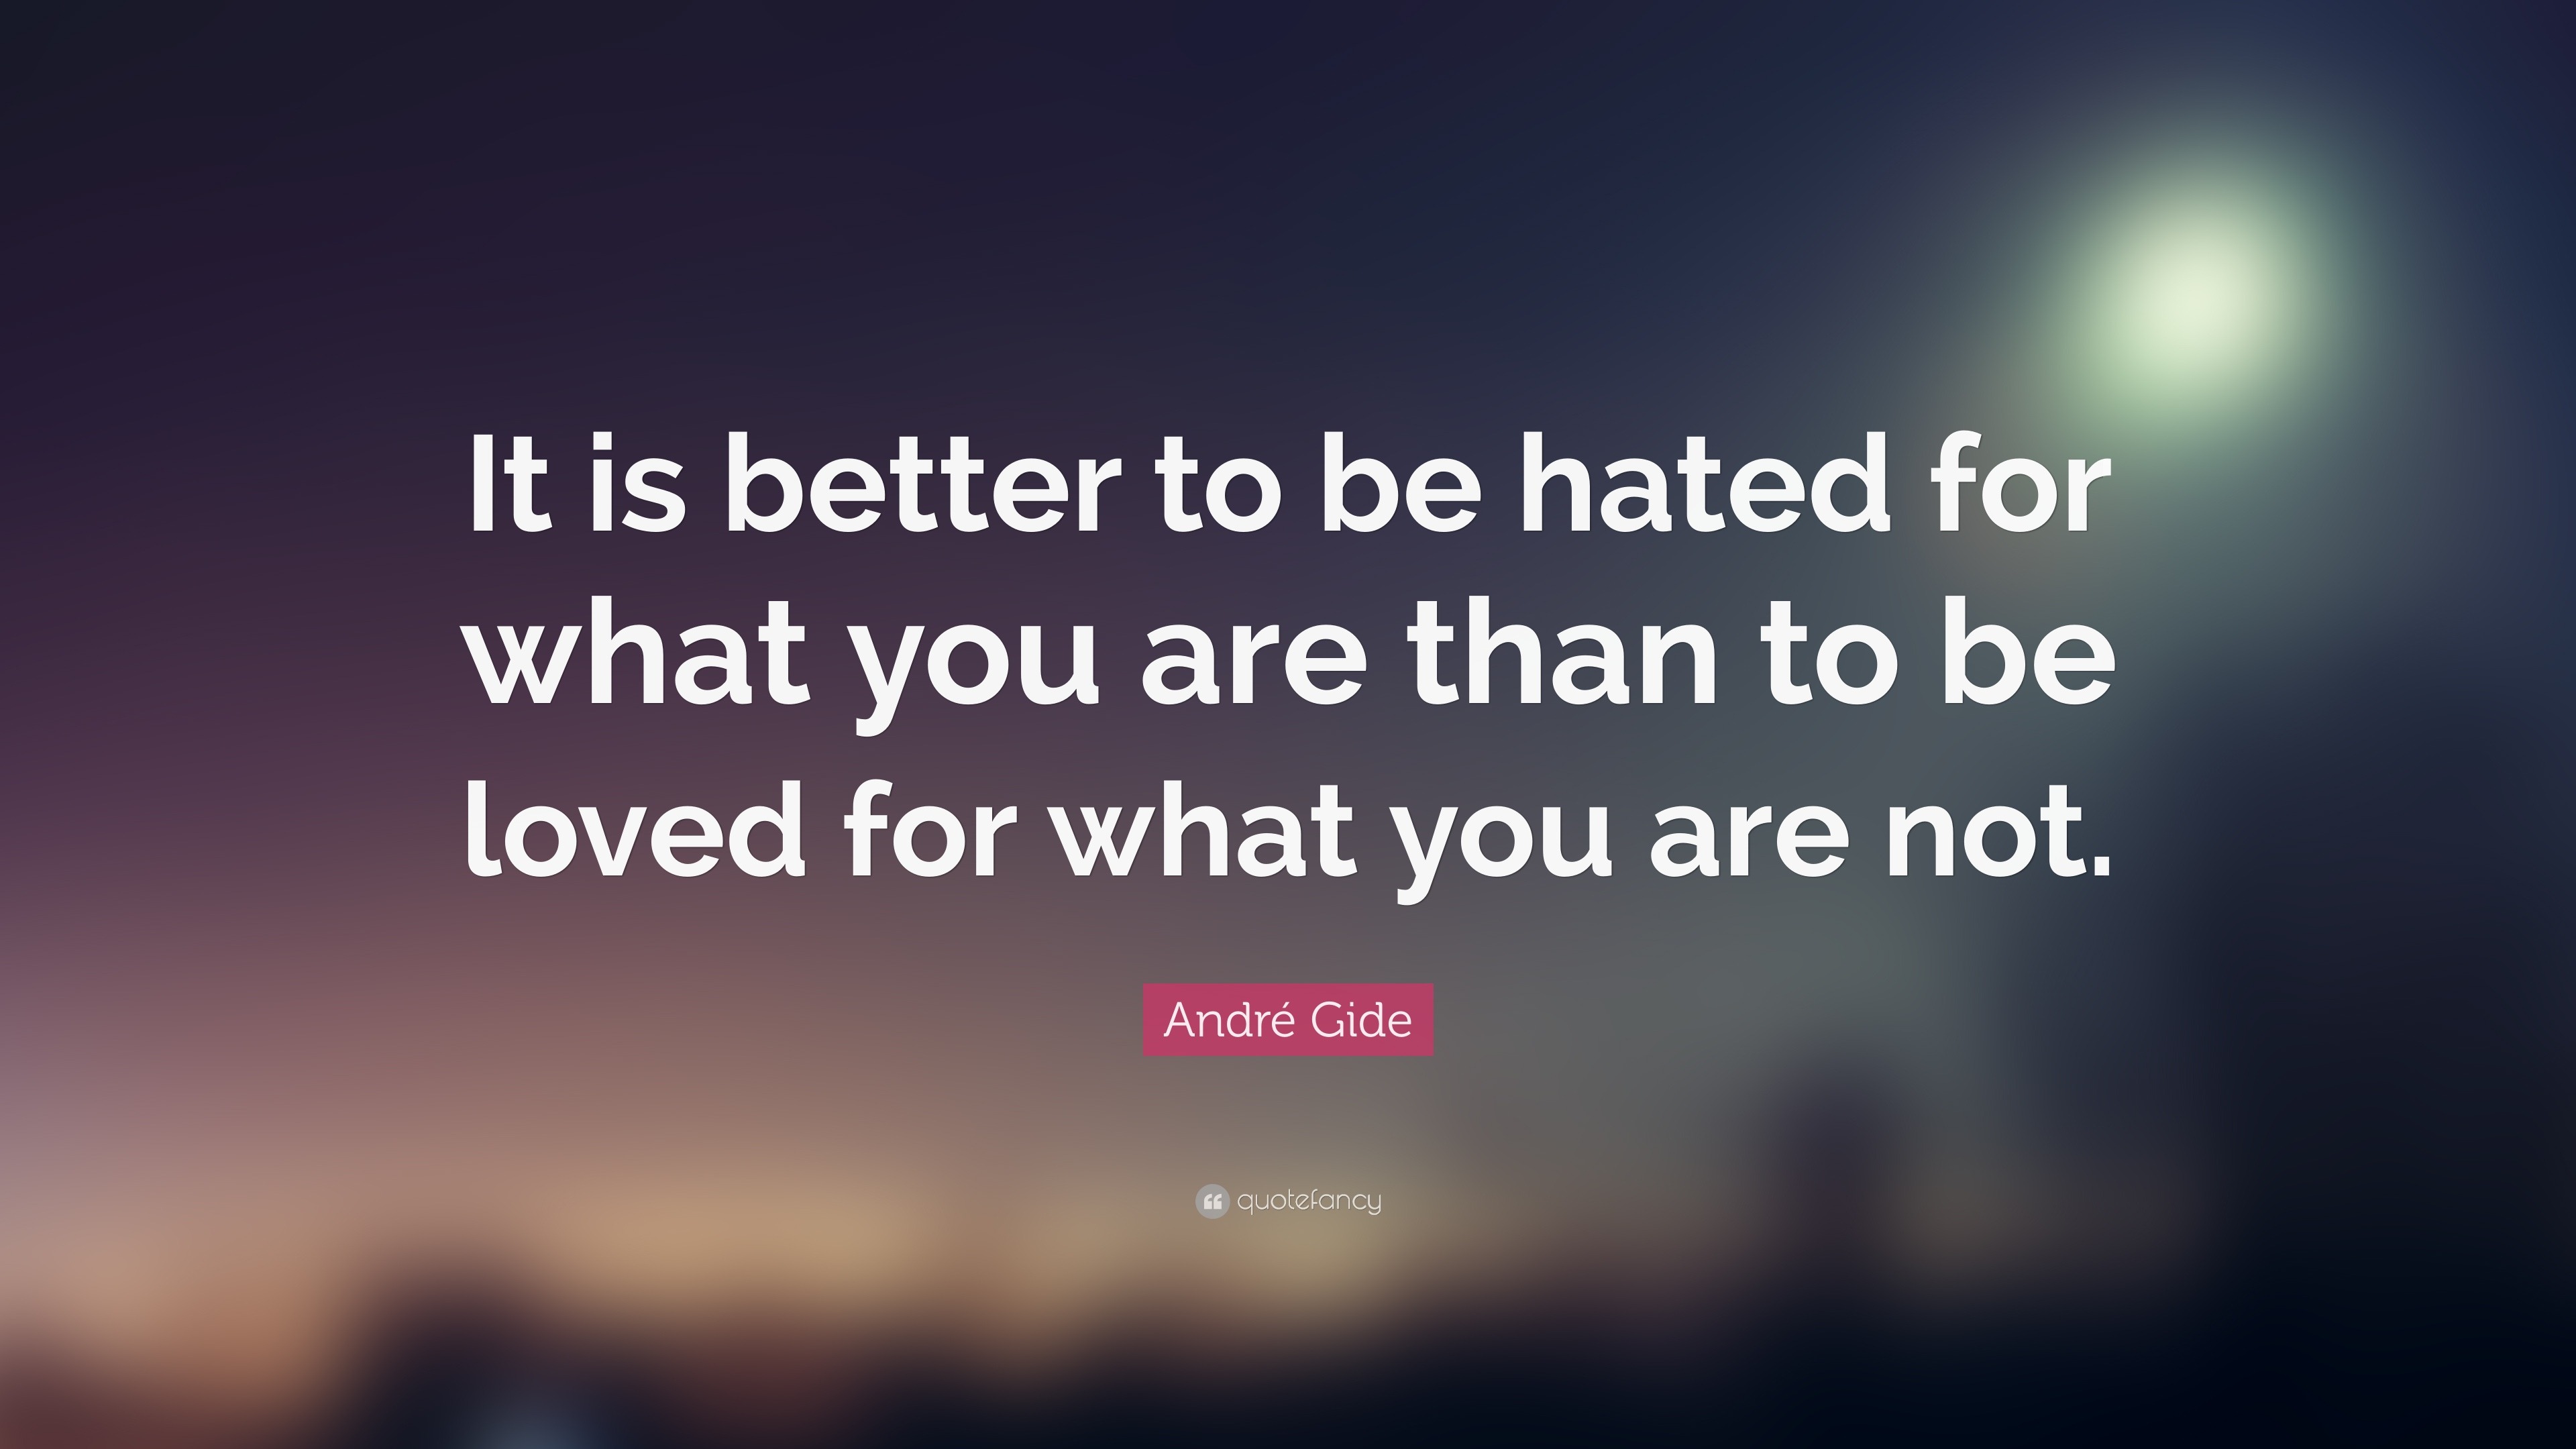 André Gide Quote “It is better to be hated for what you are than